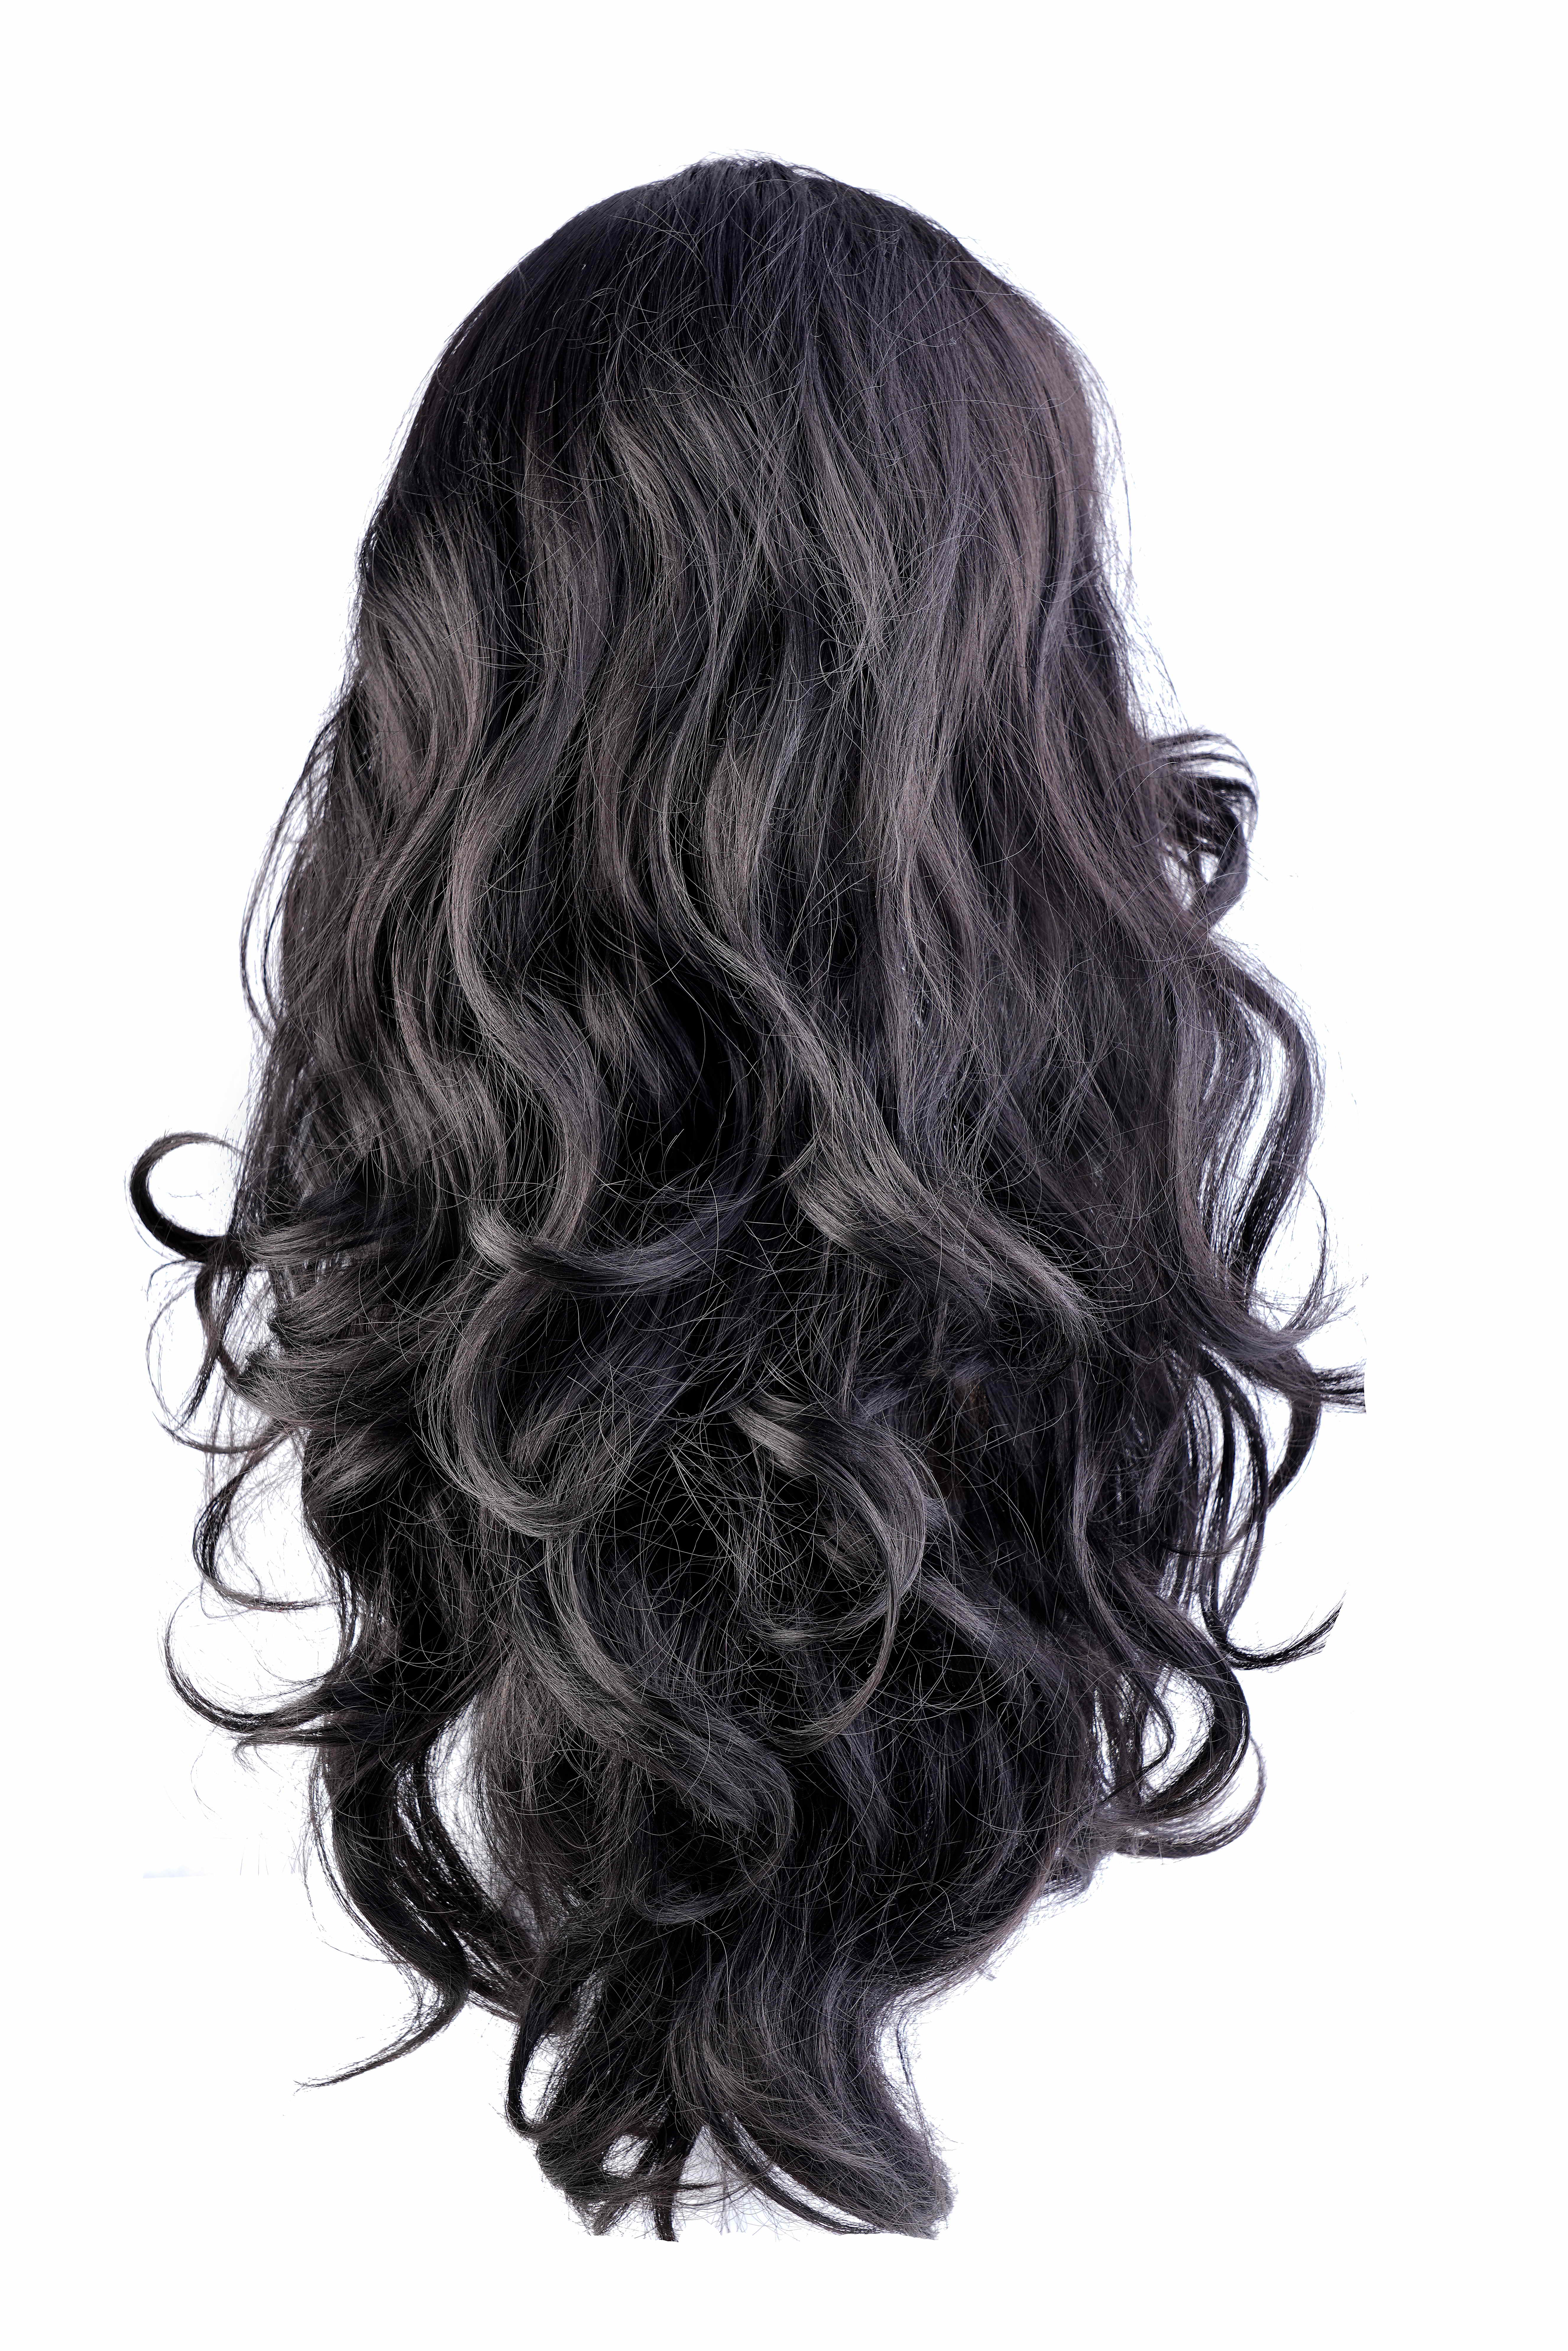 Full Head Wig | Buy Curly Hair Extensions - Da Extensionzz